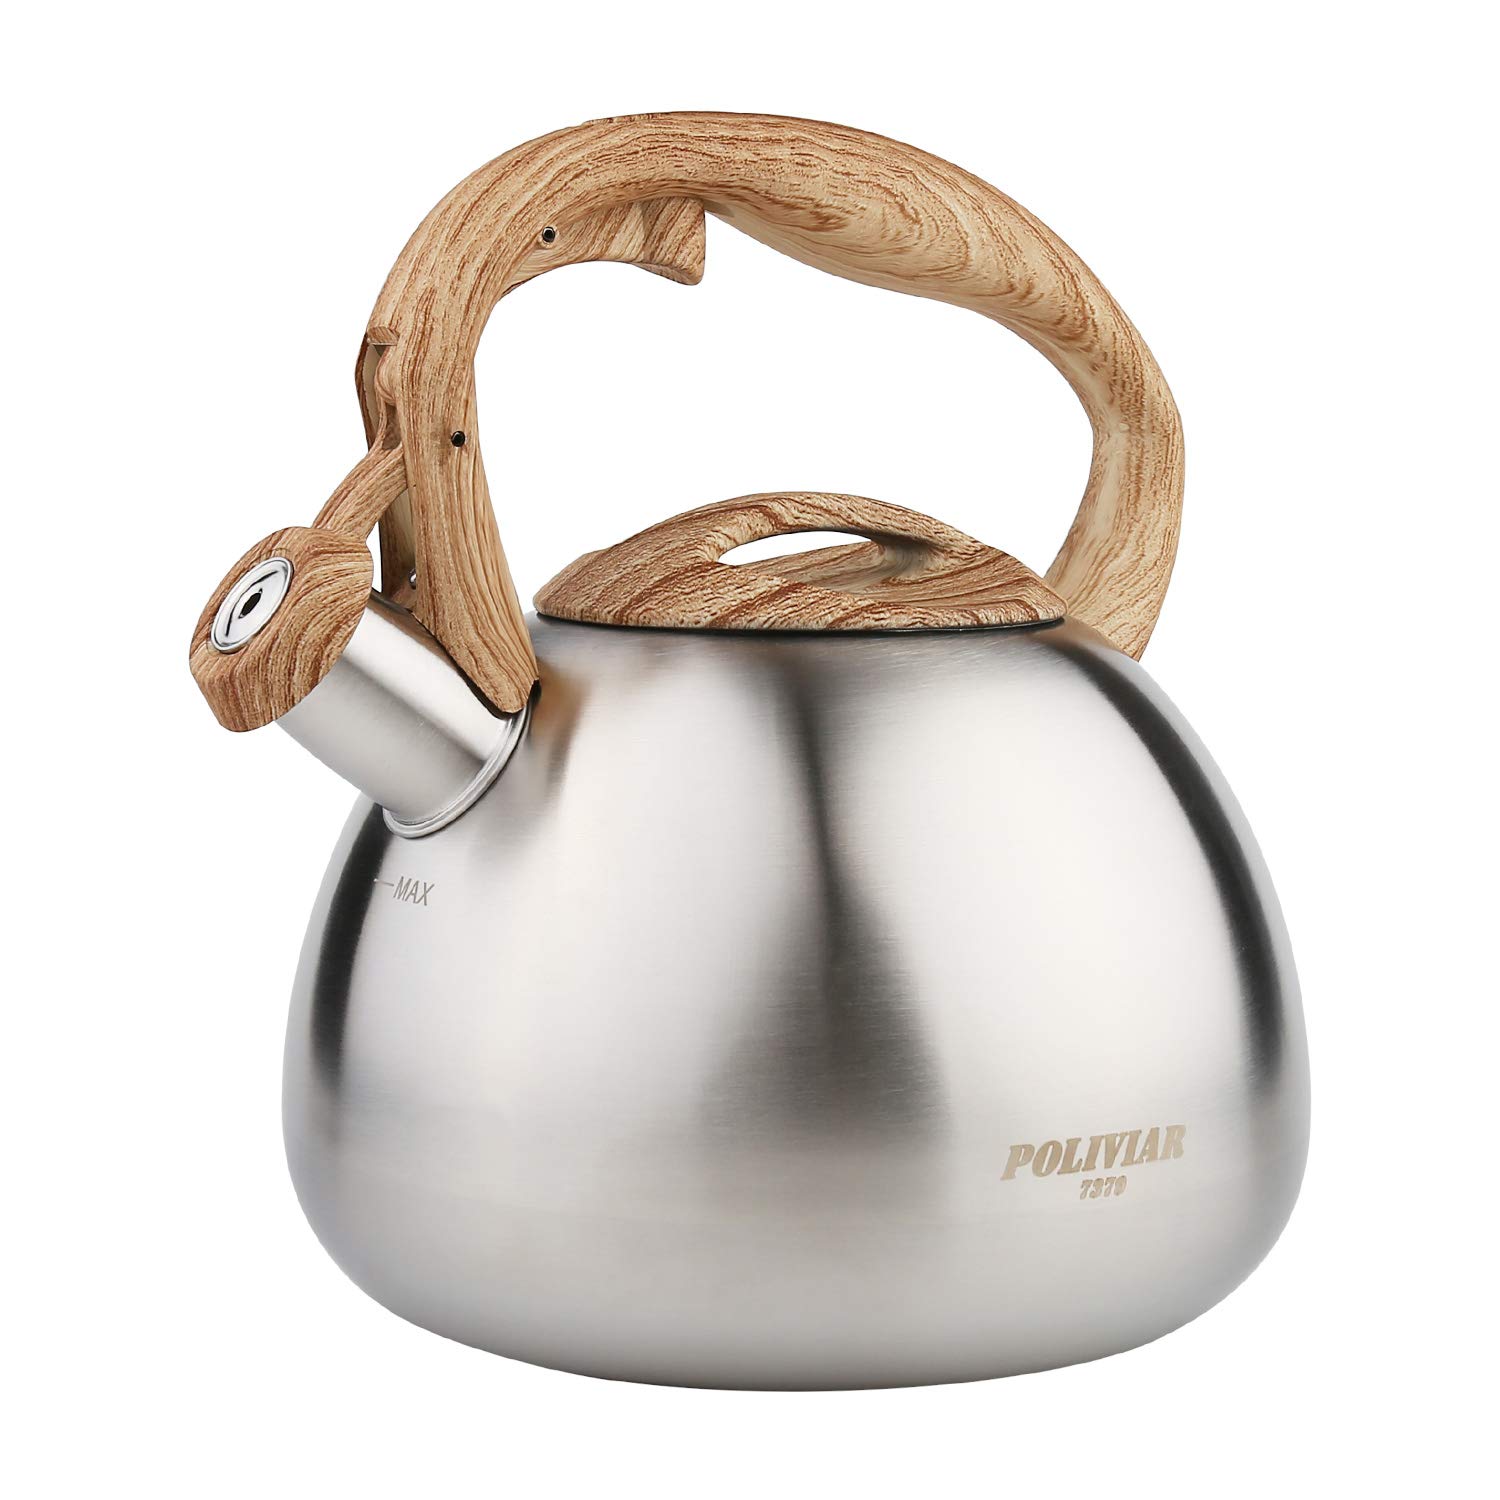 POLIVIAR Tea Kettle, 2.7 Quart Silver Ti Teapot Stovetop, Loud Whistling Kettle for Tea and Coffee, Food Grade Stainless Steel for No-Rust and Anti...